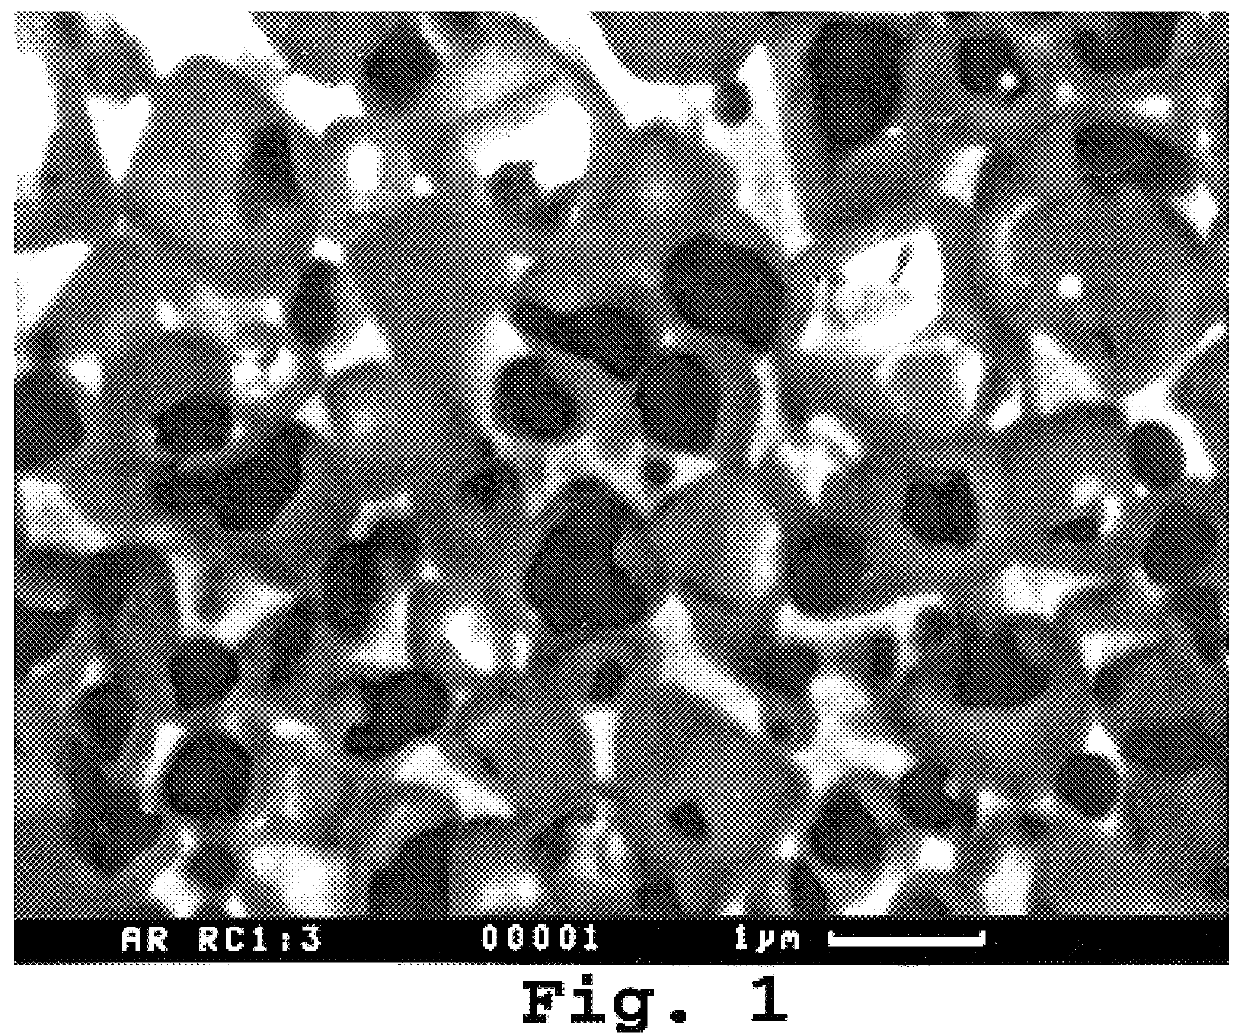 Titanium-based carbonitride alloy with controllable wear resistance and toughness